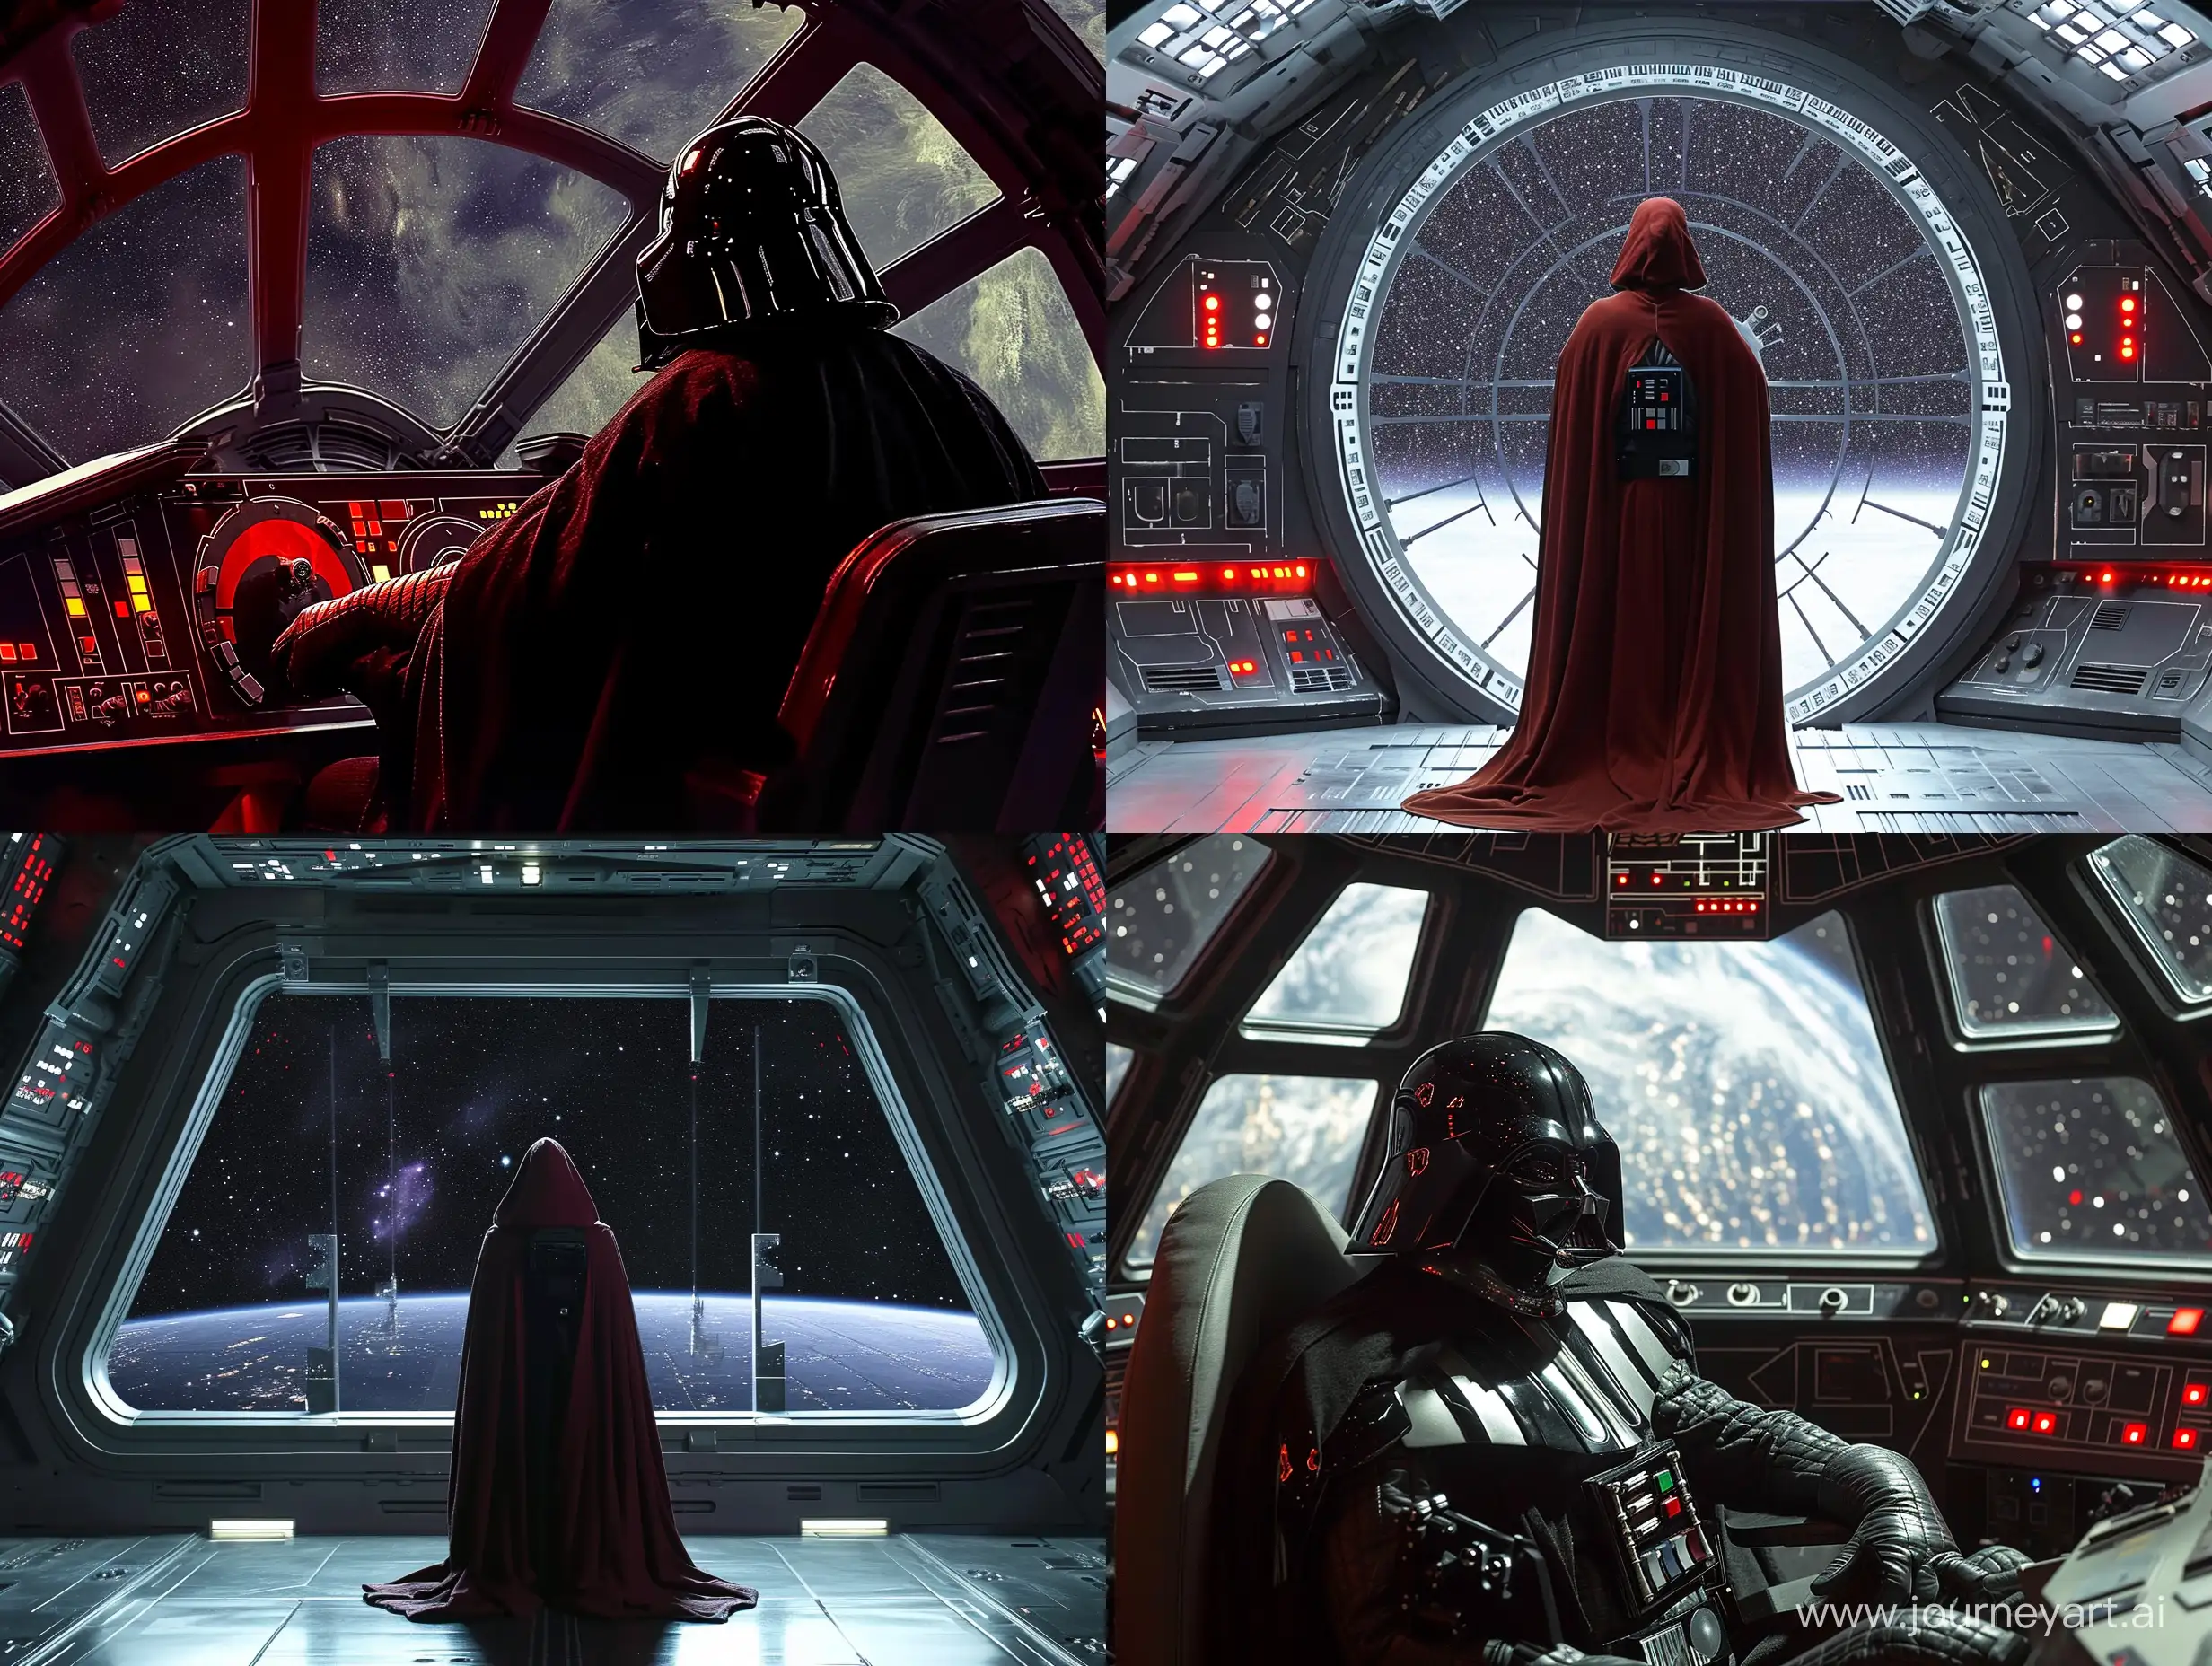 Sith Lord in the Imperial ship